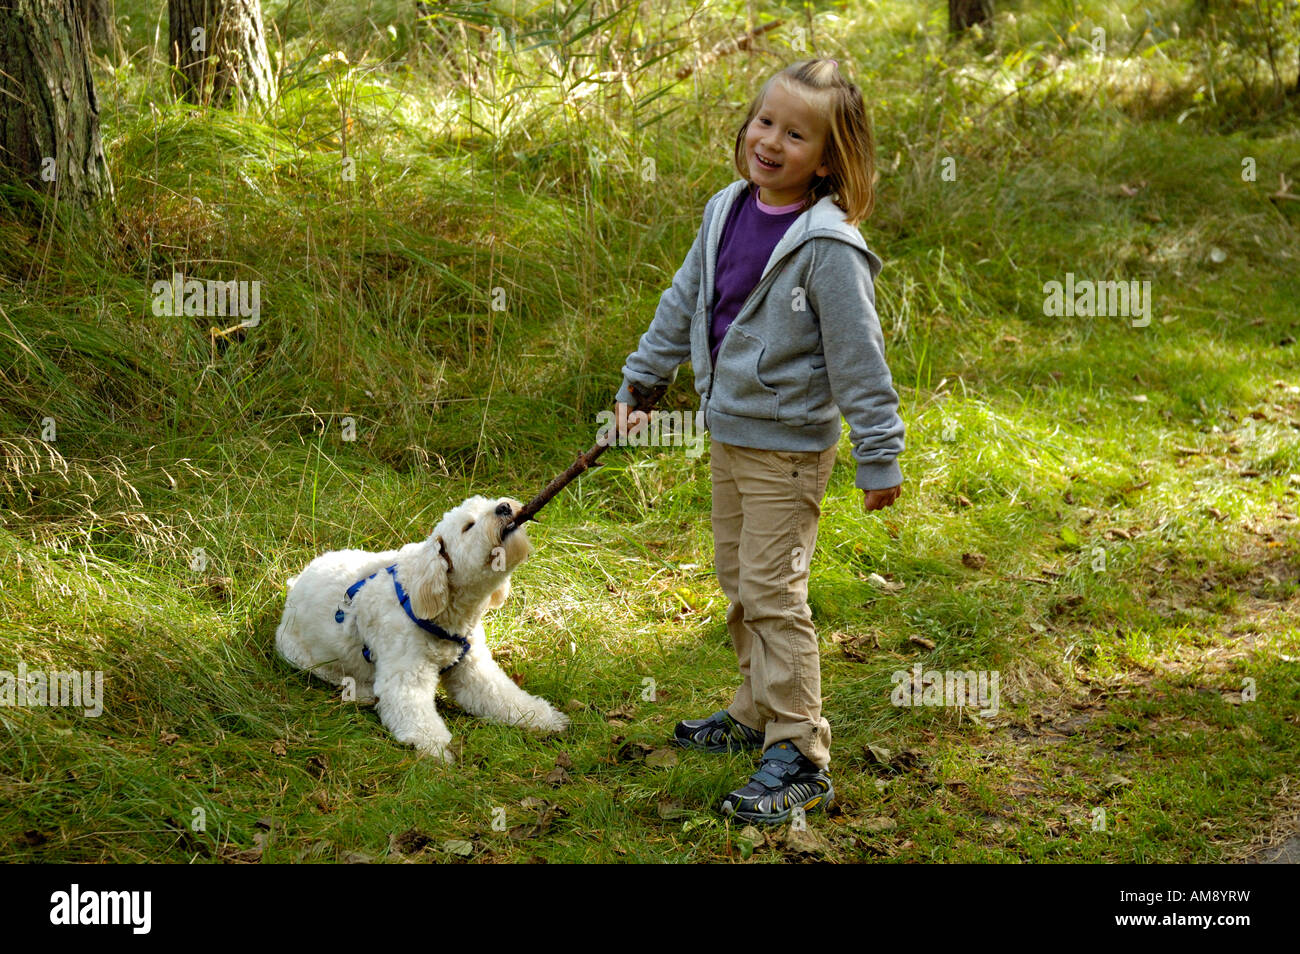 Young girl playing with pet dog outdoors. Stock Photo